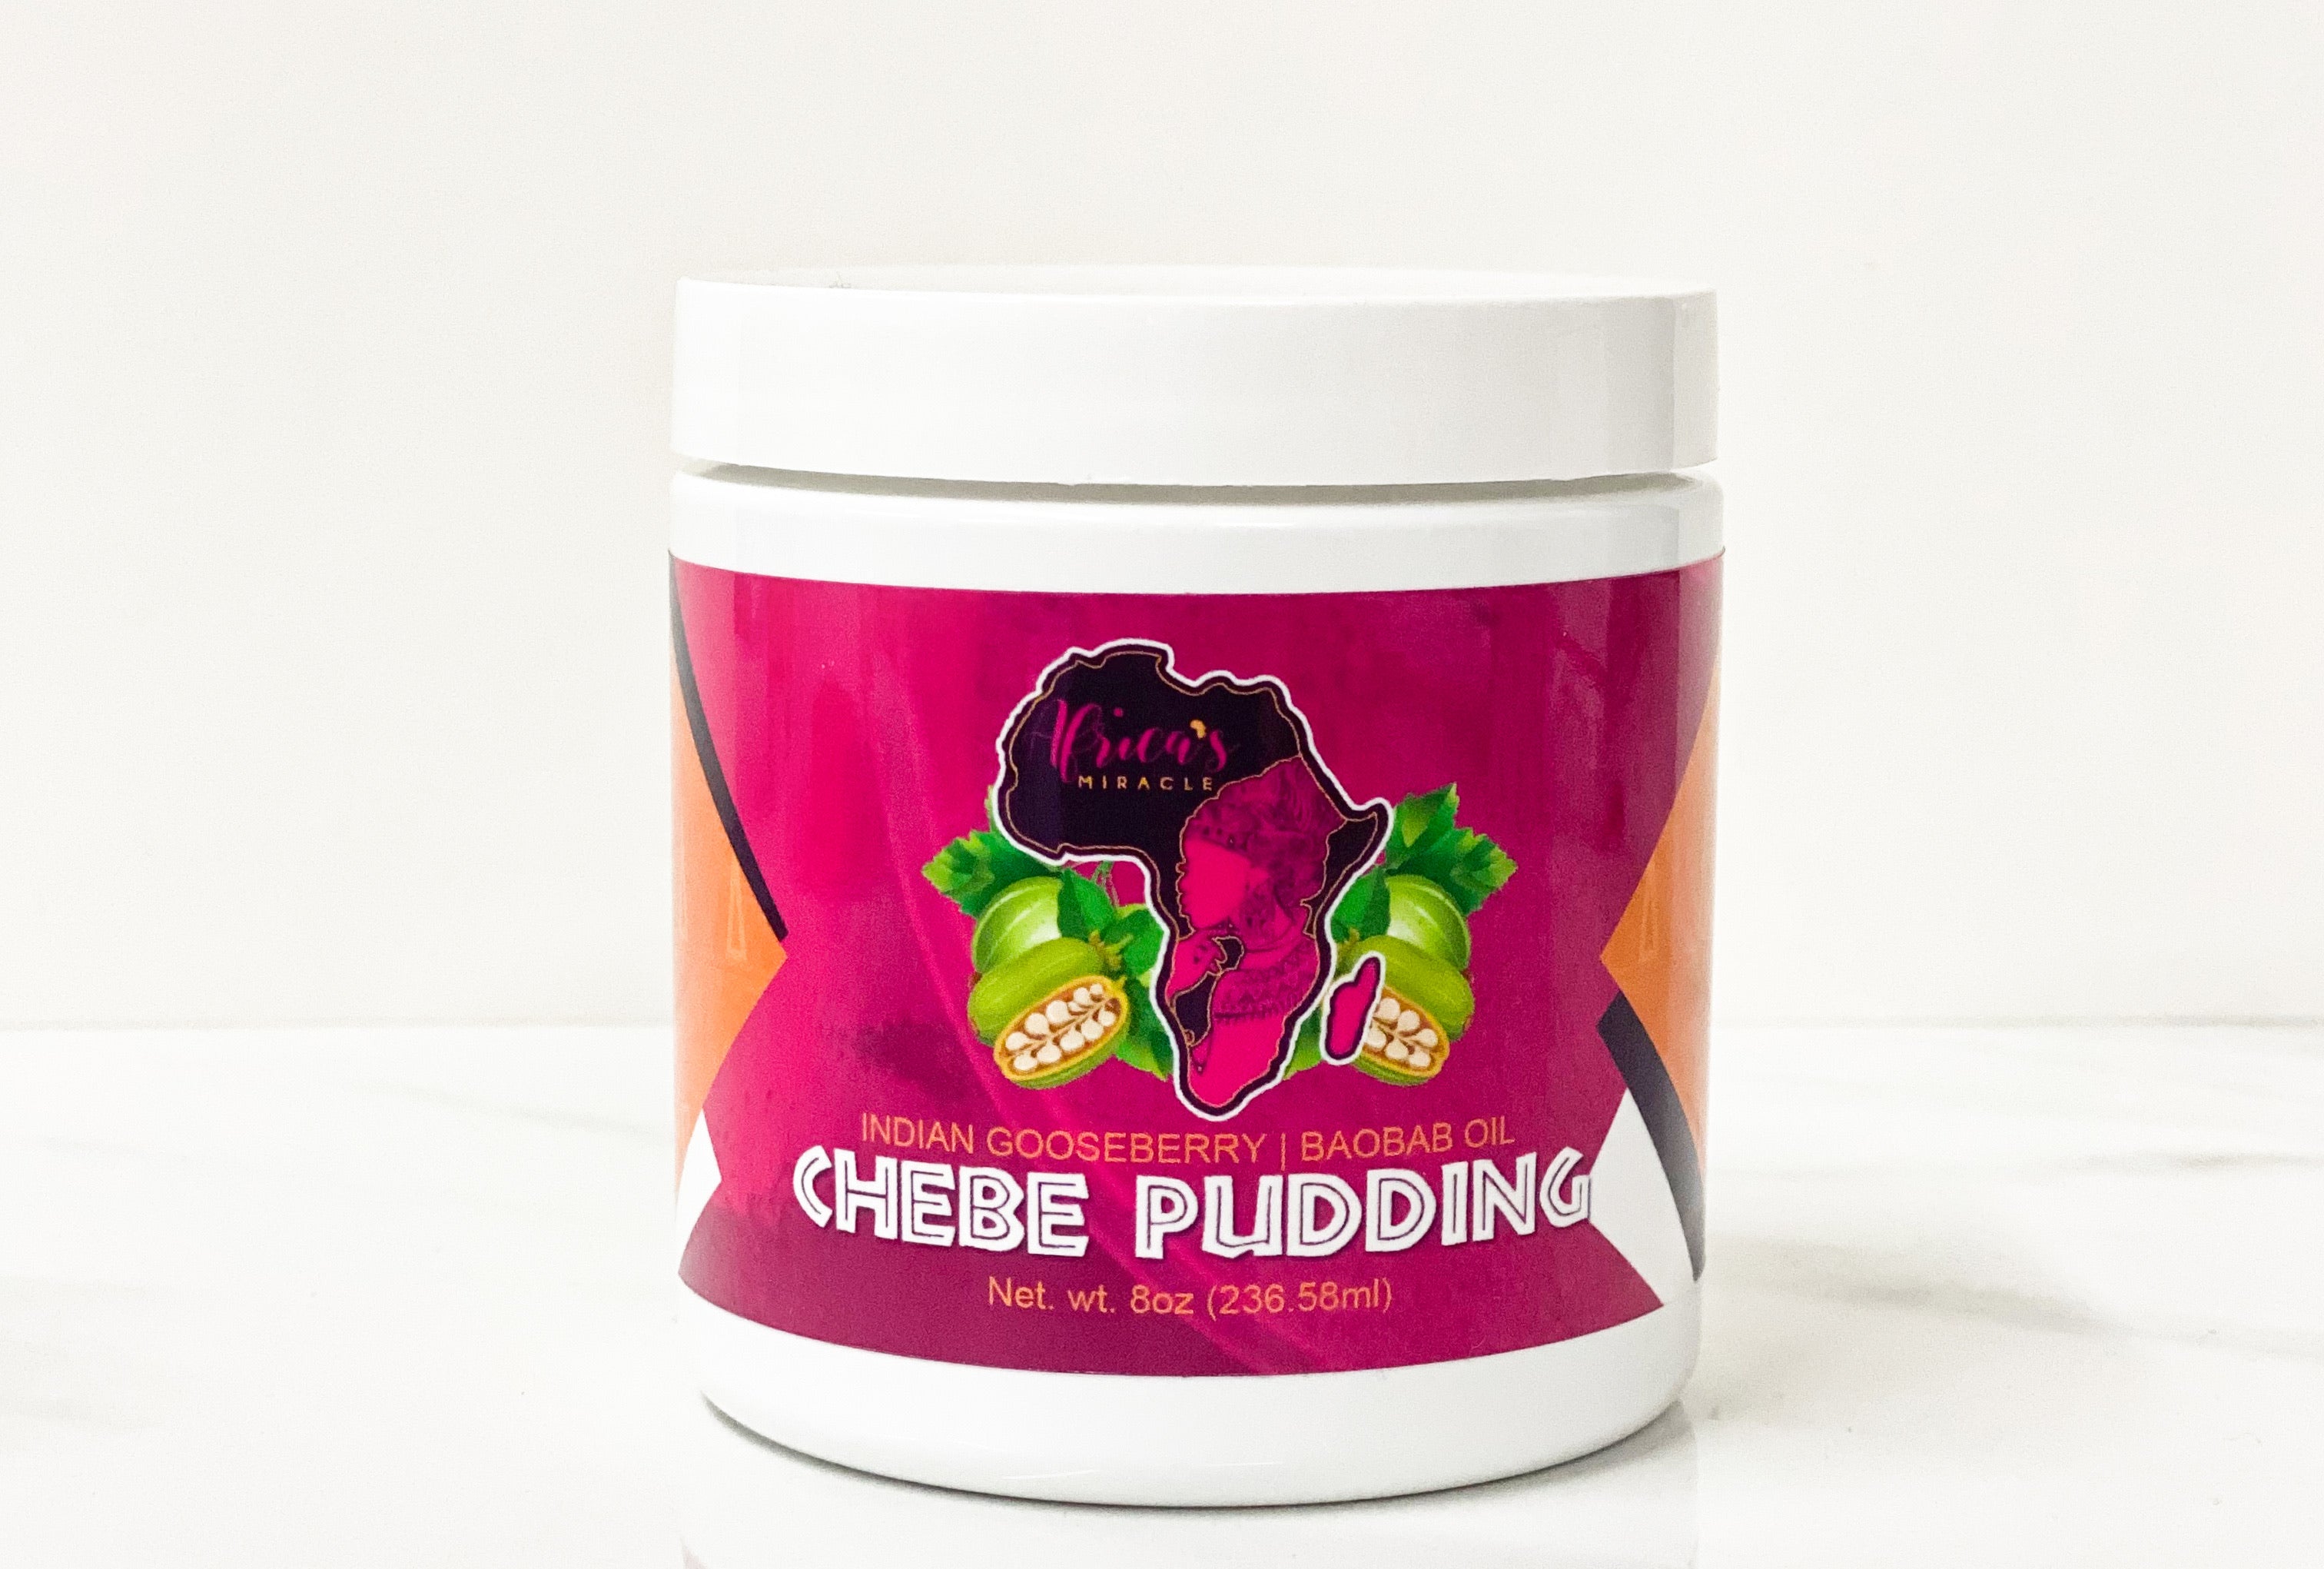 Chebe Pudding ( Indian Gooseberry & Baobab Oil)